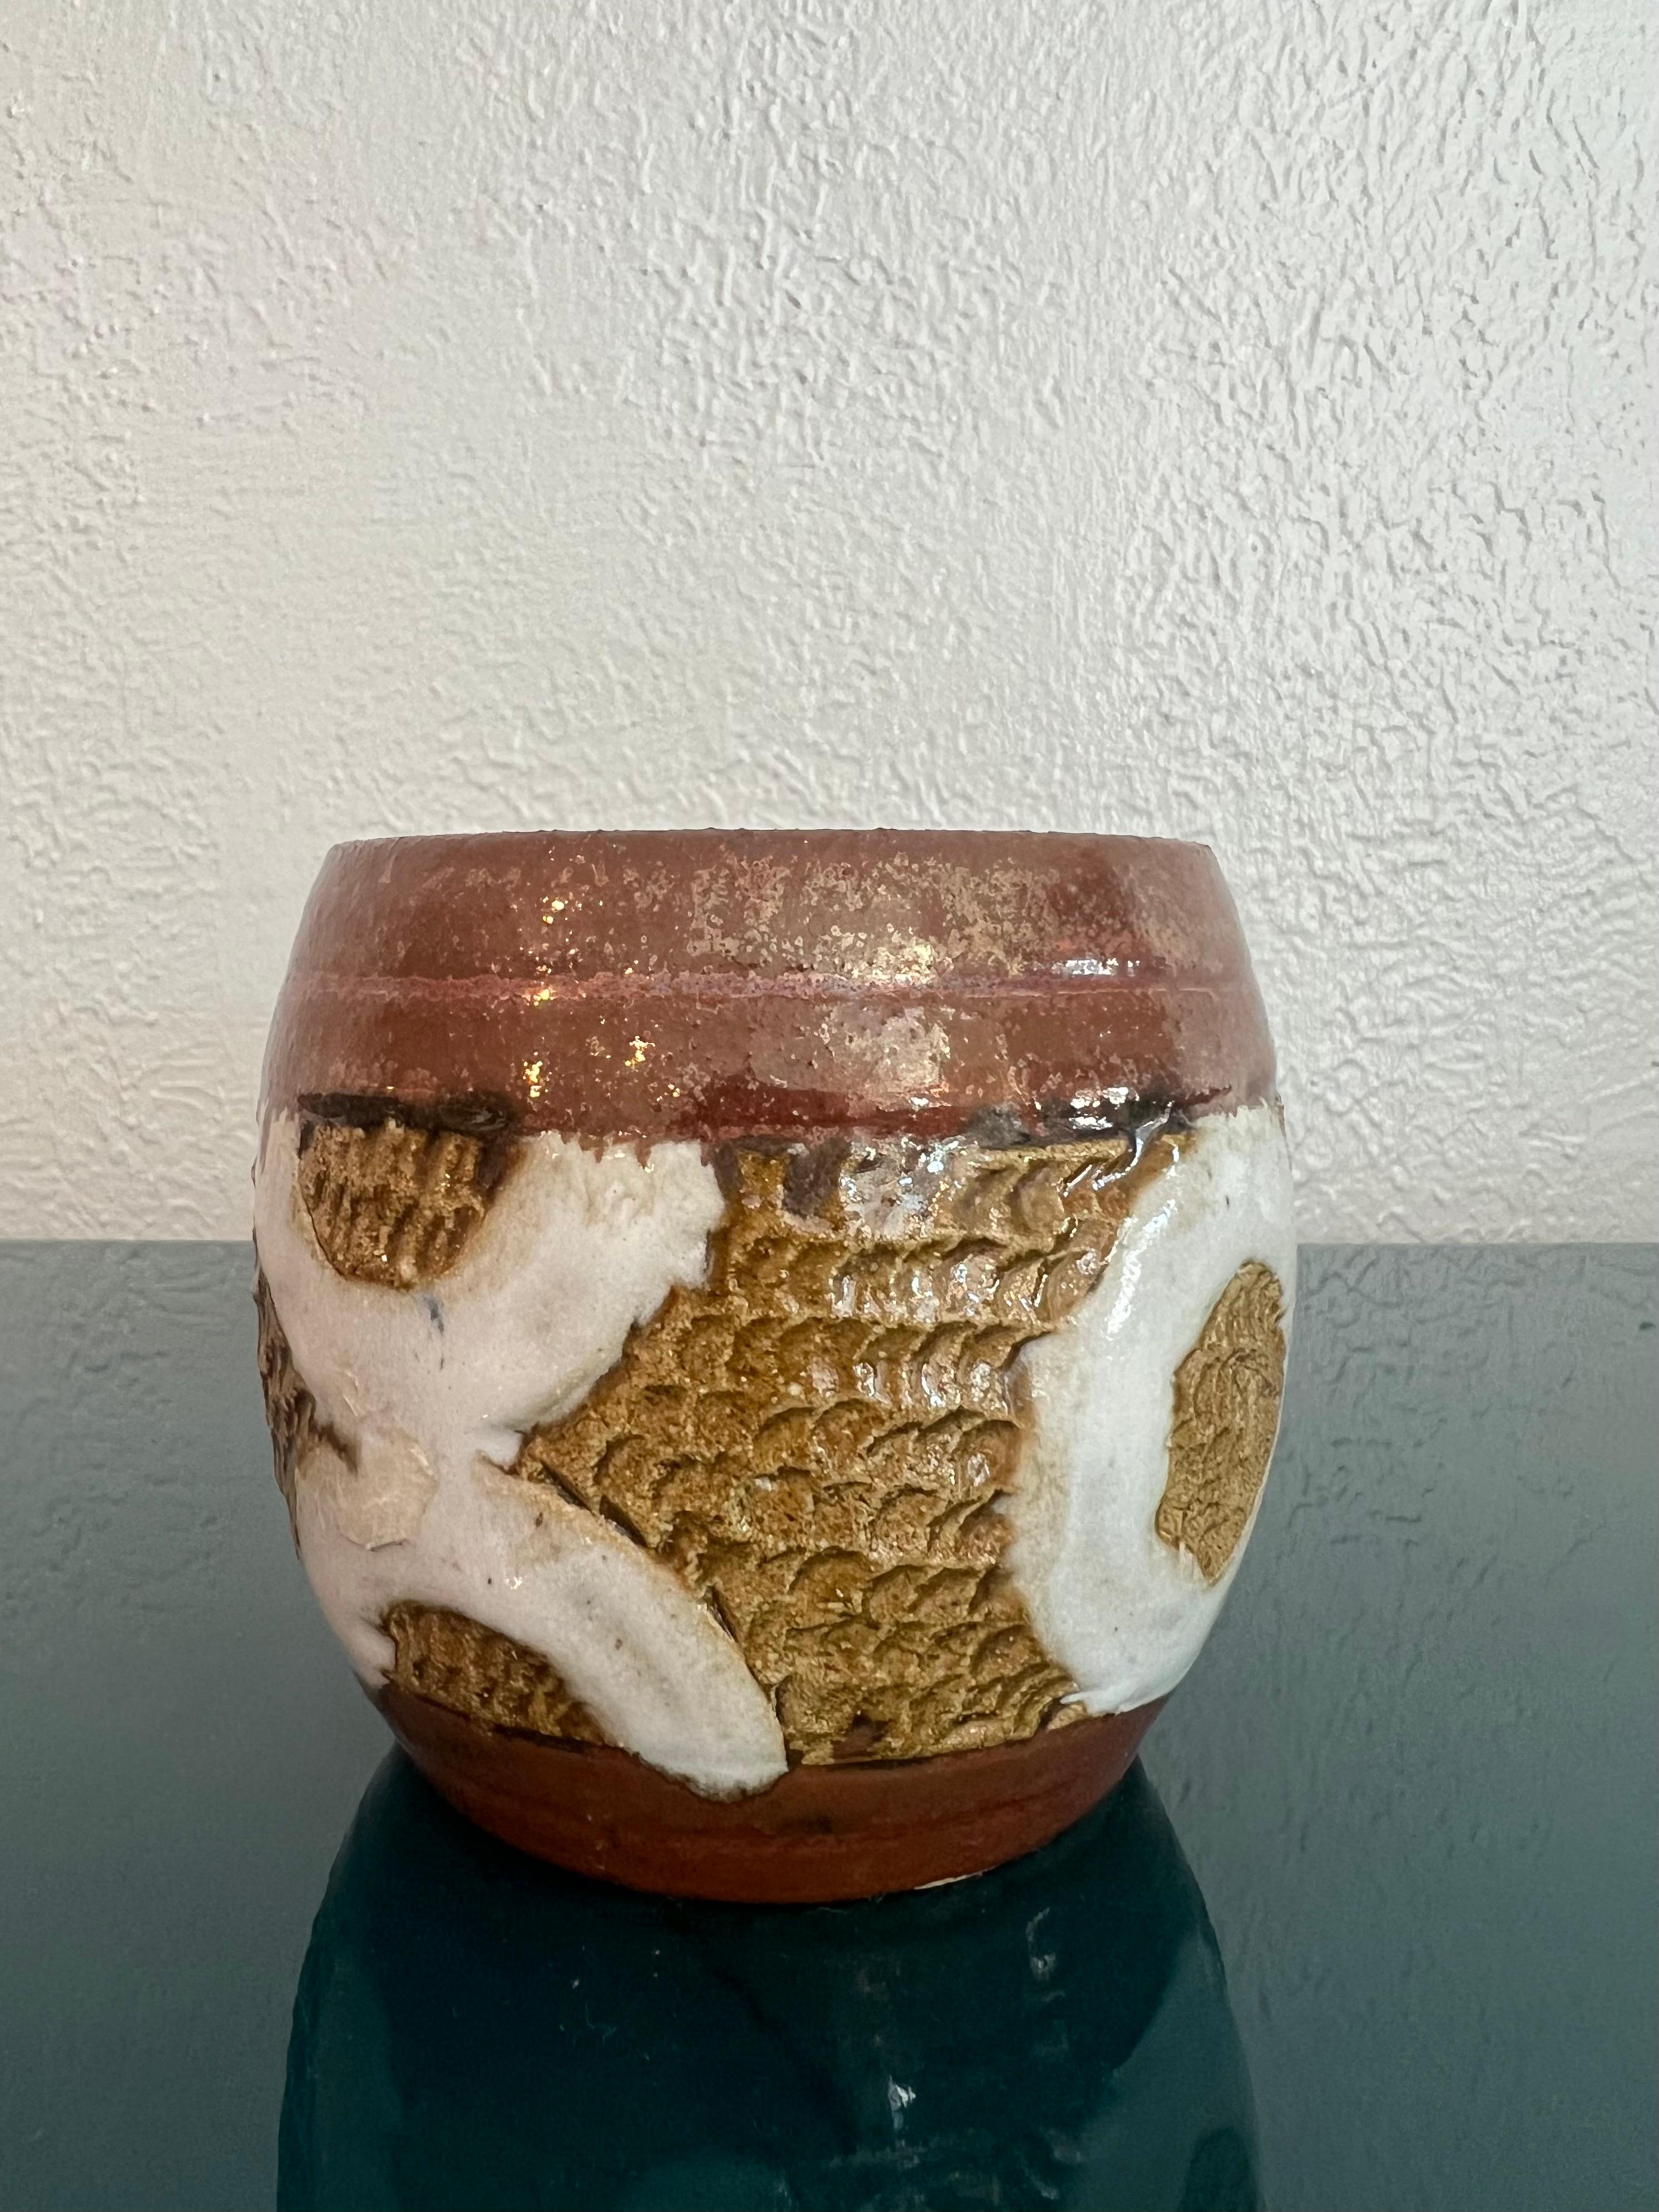 Studio pottery vessel. Nice glaze work with XO motif.

Would work well in a variety of interiors such as modern, mid century modern, Hollywood regency, etc. Piece blends seamlessly with other designers such as Warren Platner, Paul Evans, Gabriella